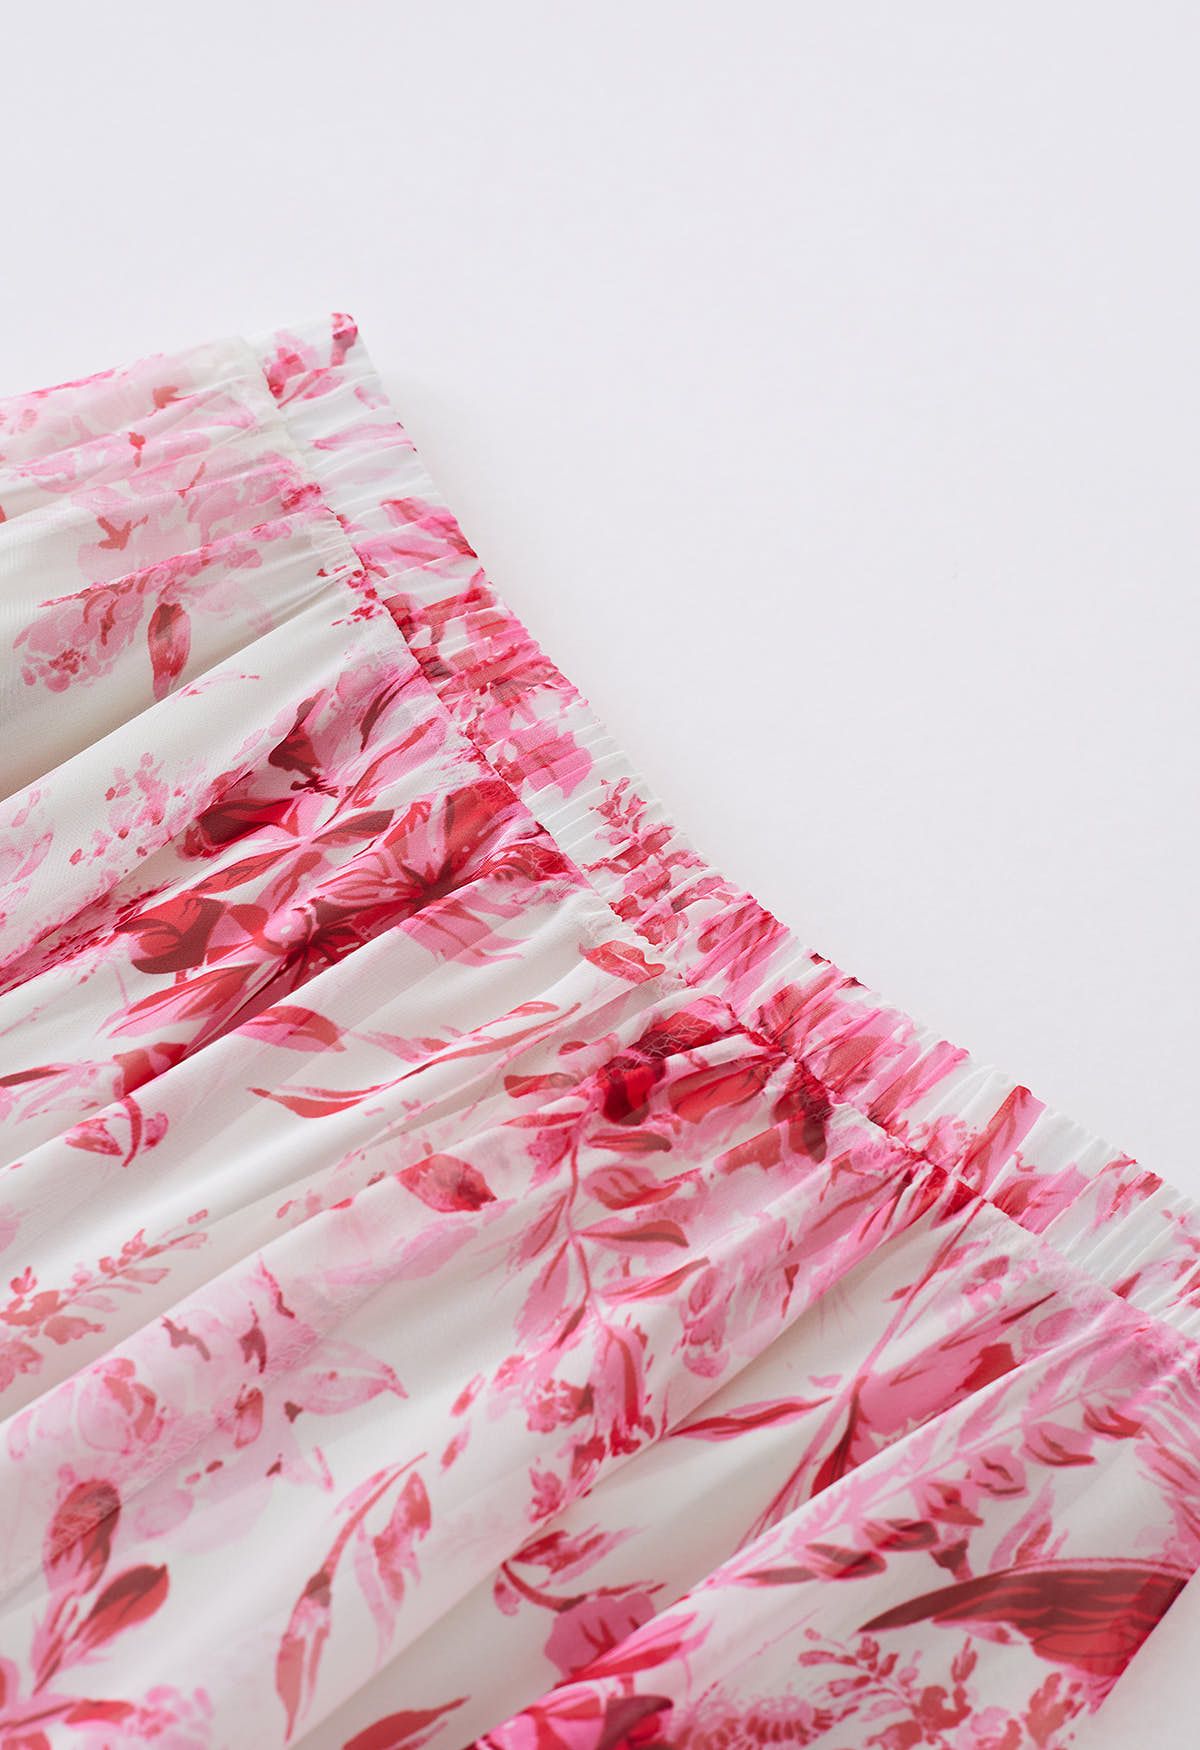 Summer Forest Printed Chiffon Maxi Skirt in Pink